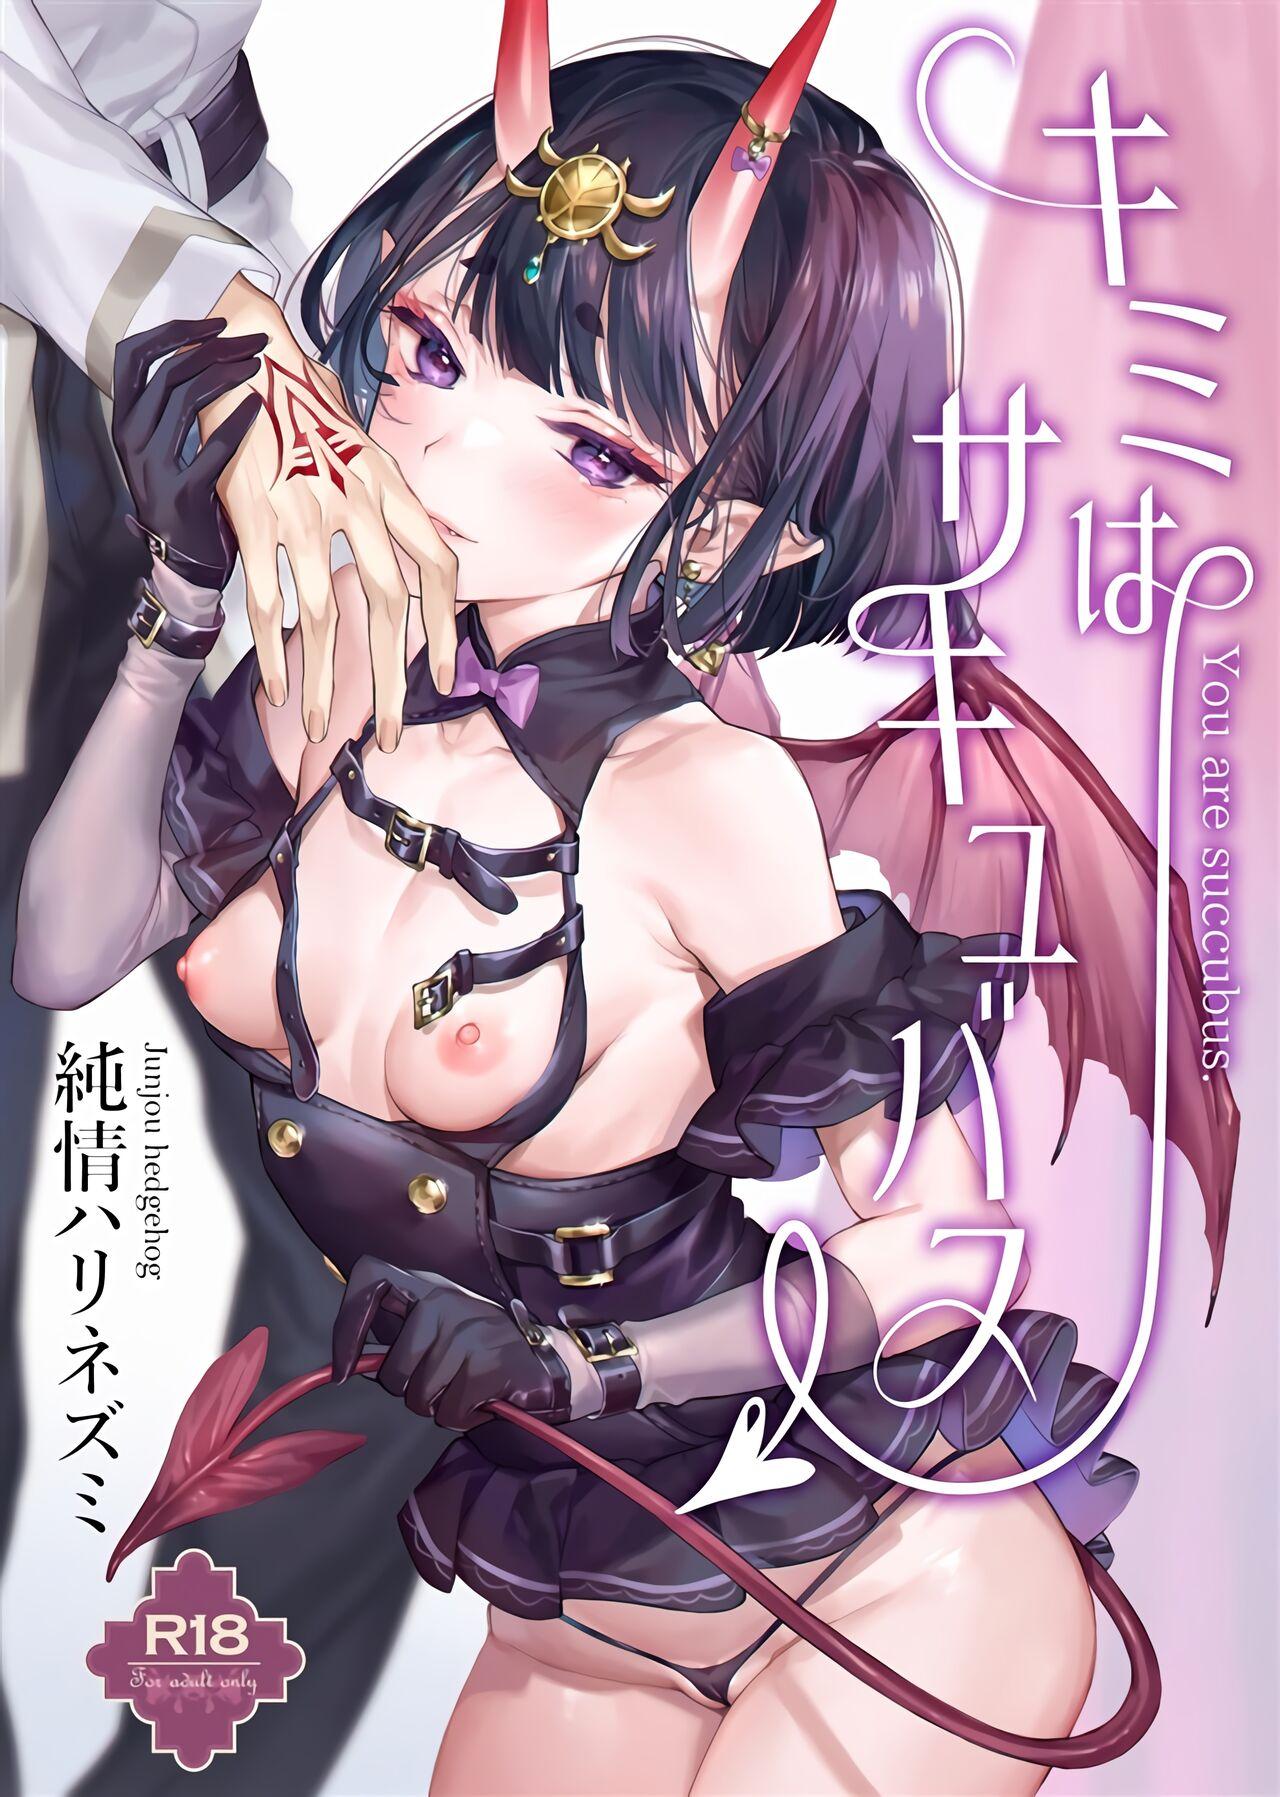 Spit Kimi wa Succubus - Fate grand order Yanks Featured - Picture 1